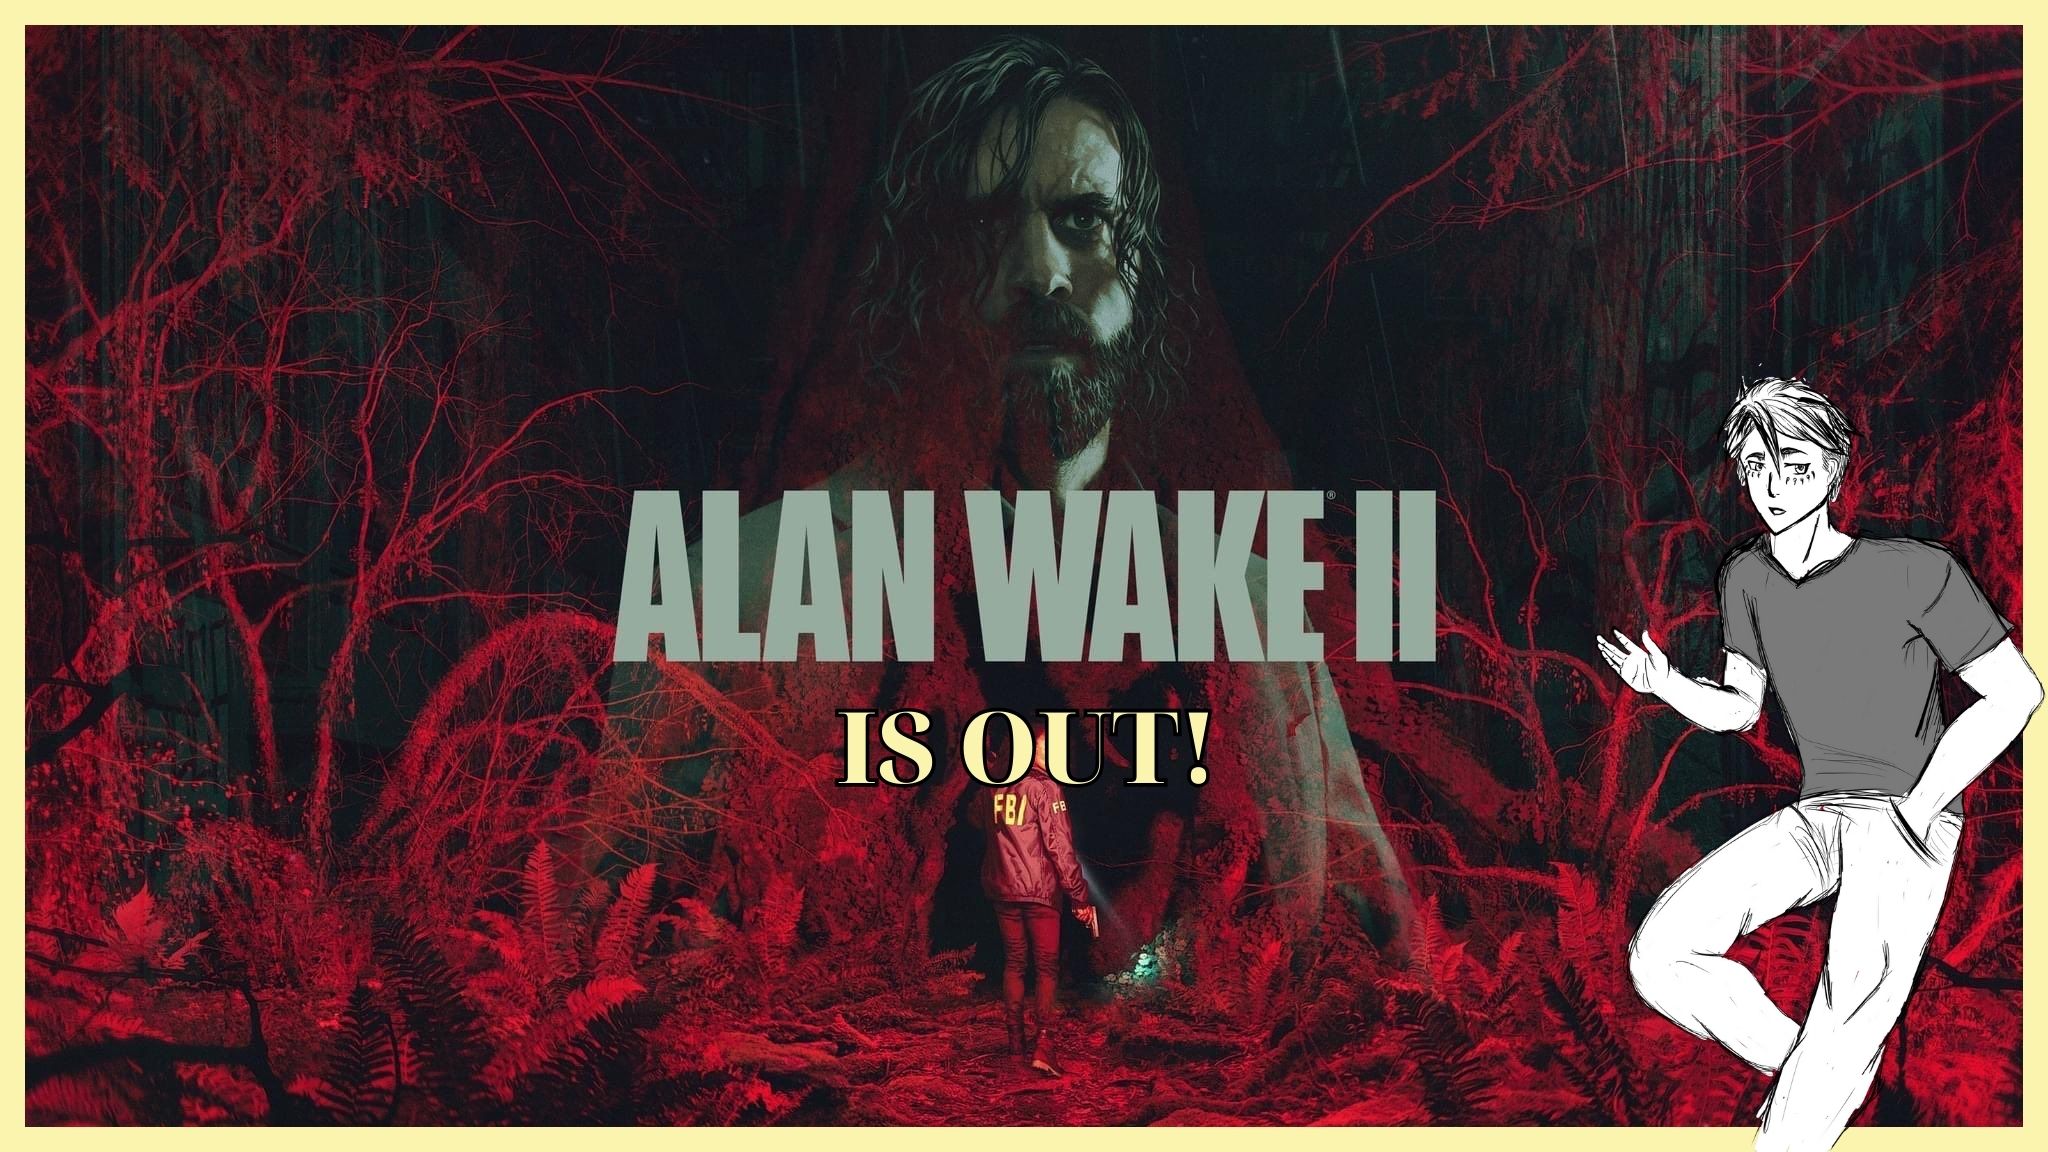 Alan Wake II is out!